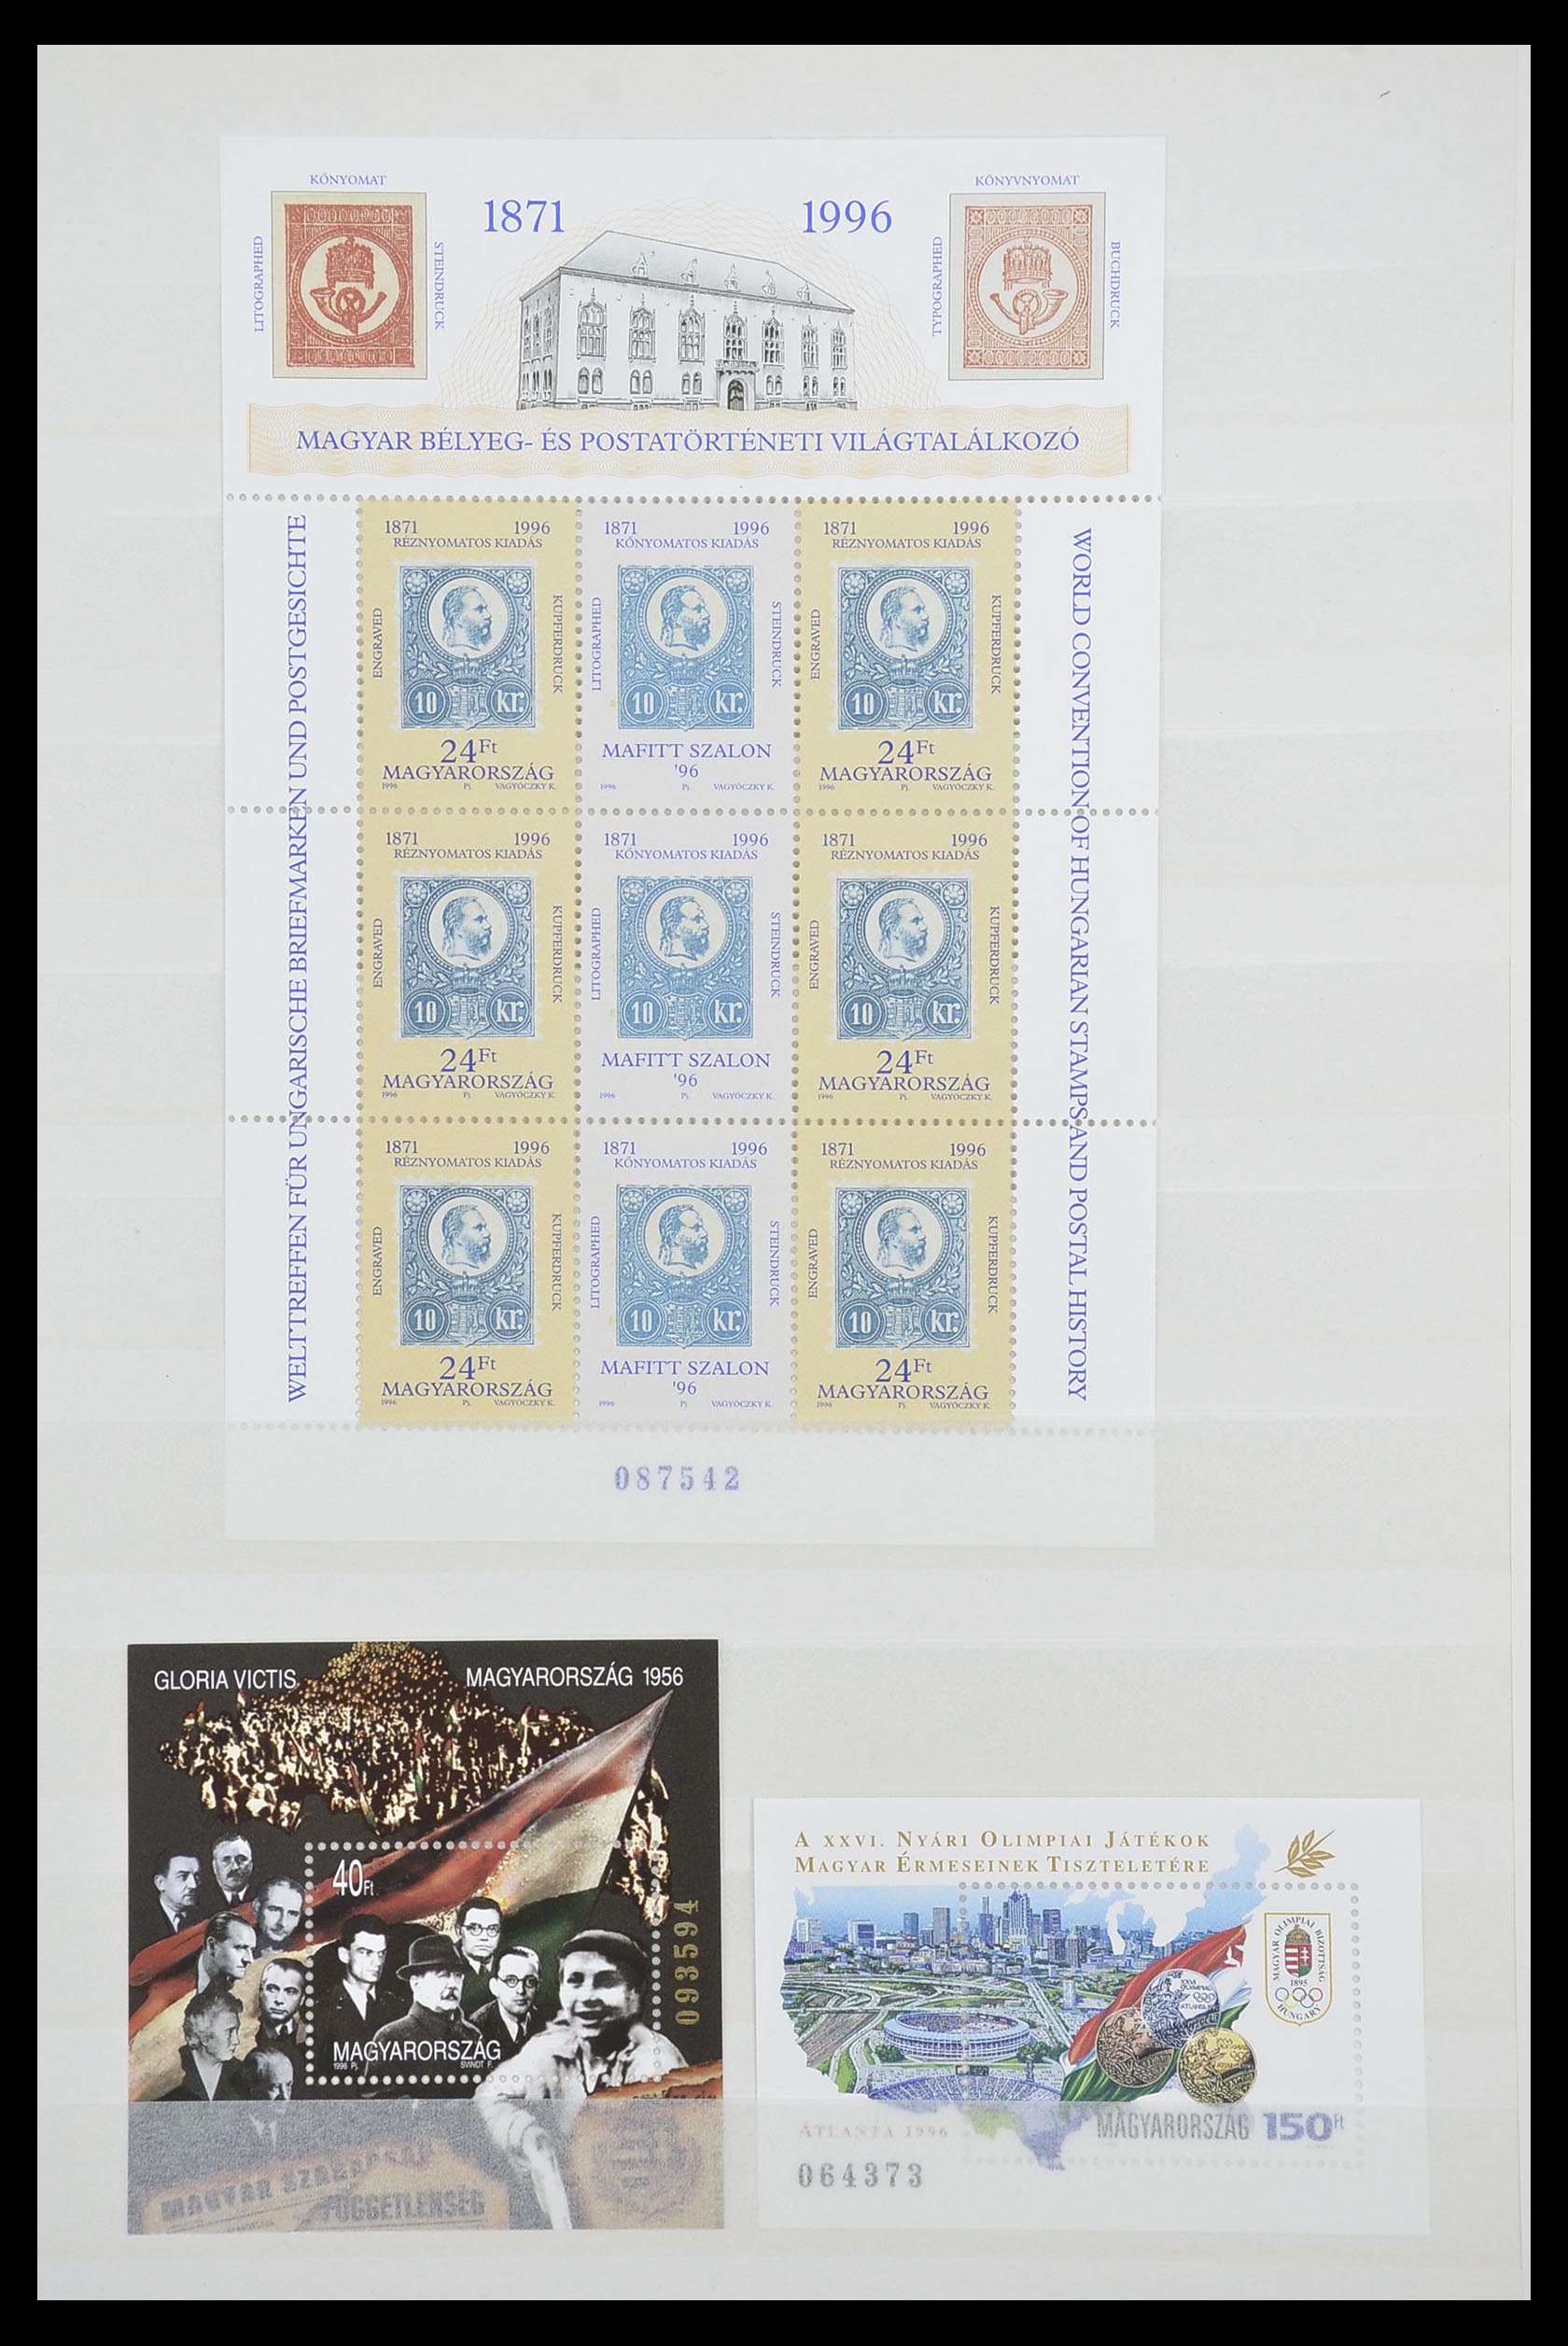 33909 021 - Stamp collection 33909 Hungary souvenir sheets 1977-2010.